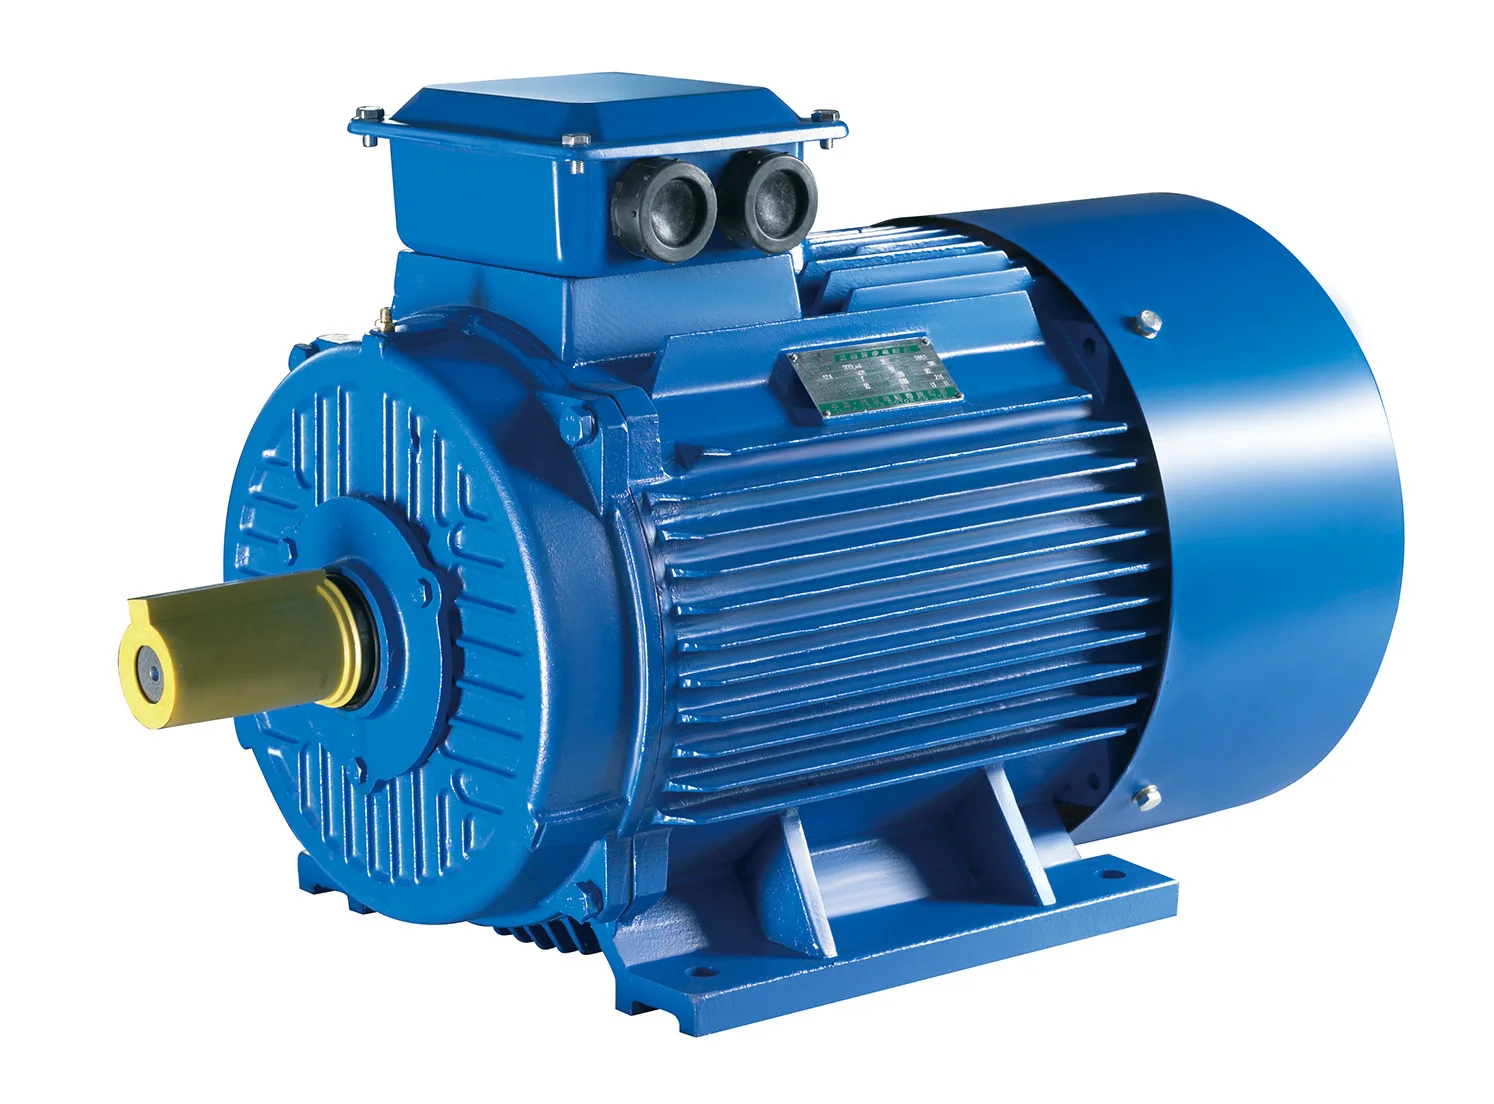 75kw 200kw 25kw 125kw Motor Thermally Protected Electric Motor - Buy ...